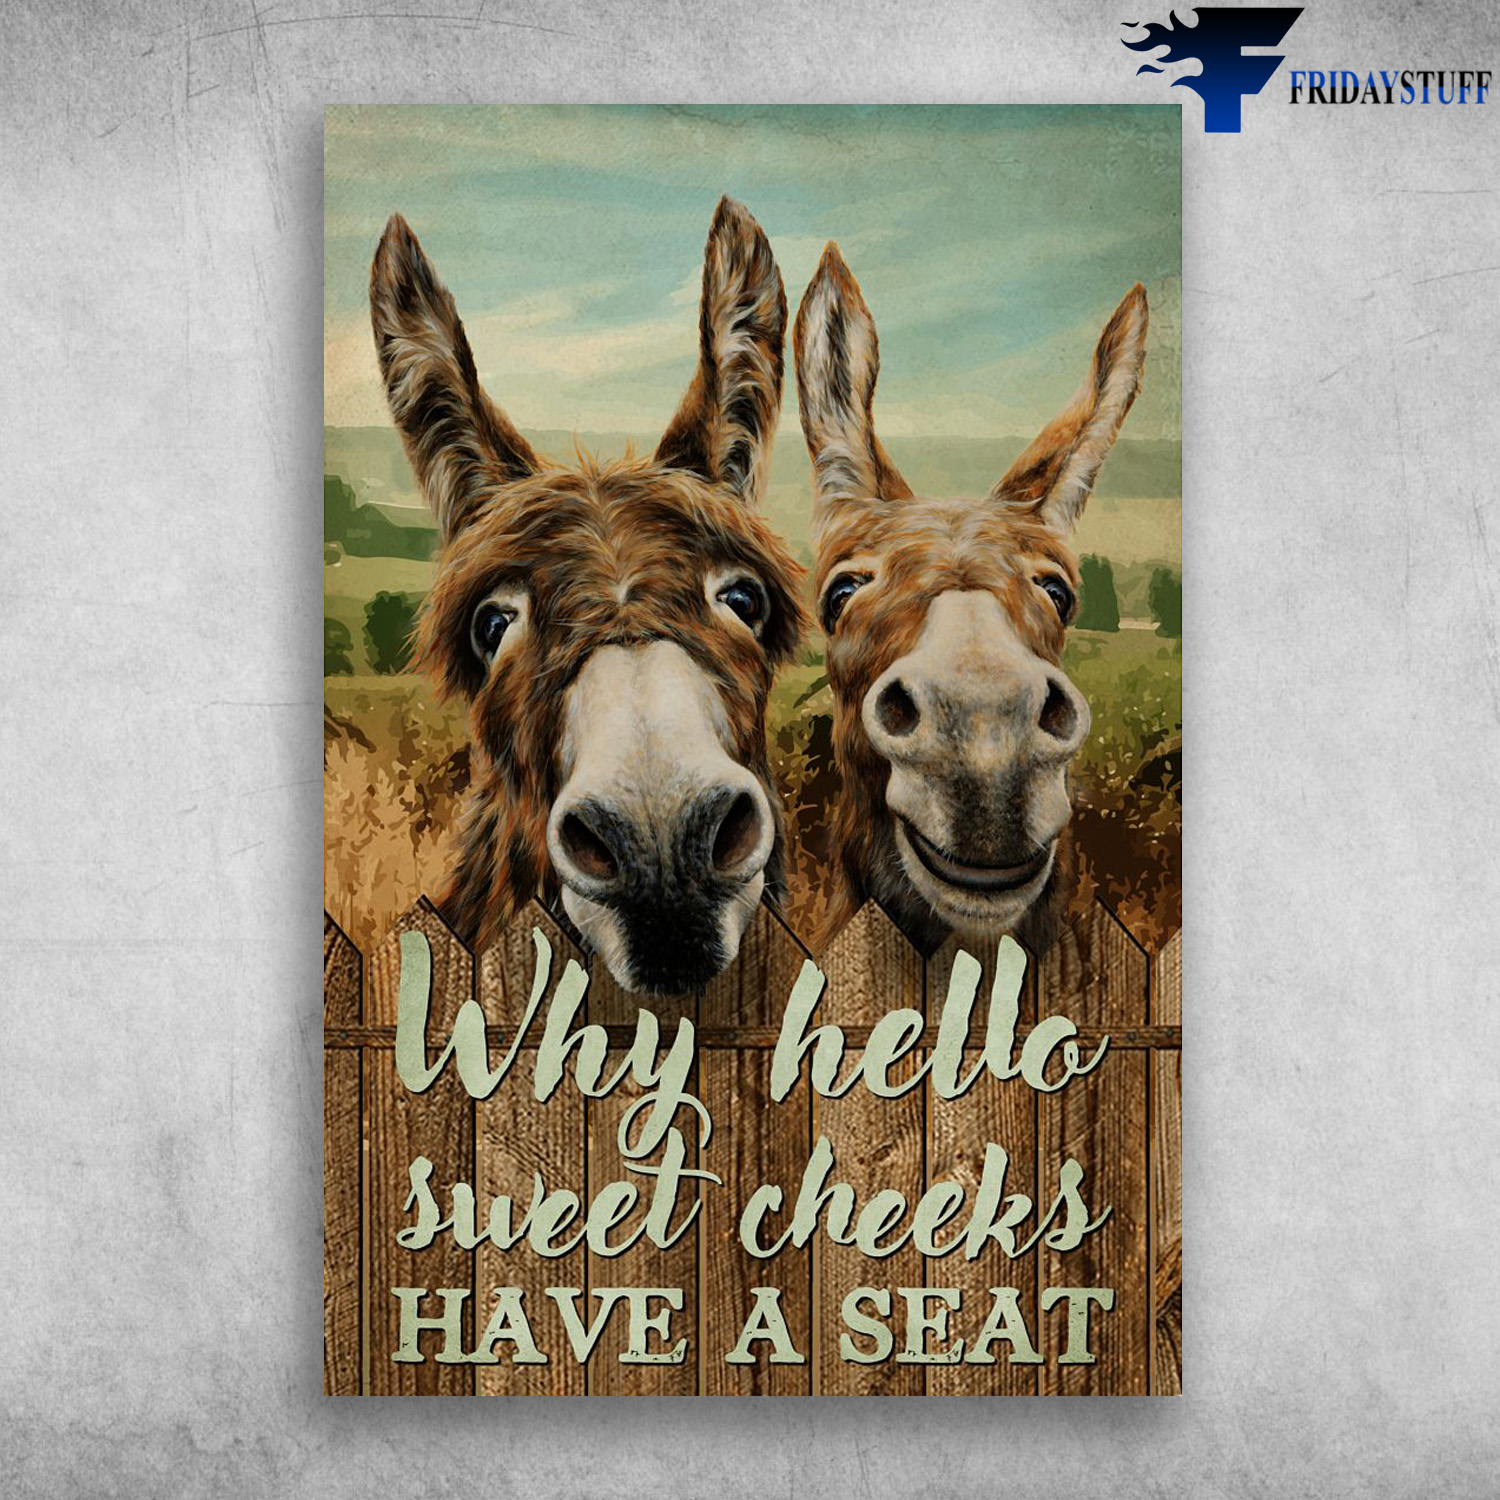 The Donkeys - Why Hello Sweet Cheeks Have A Seat